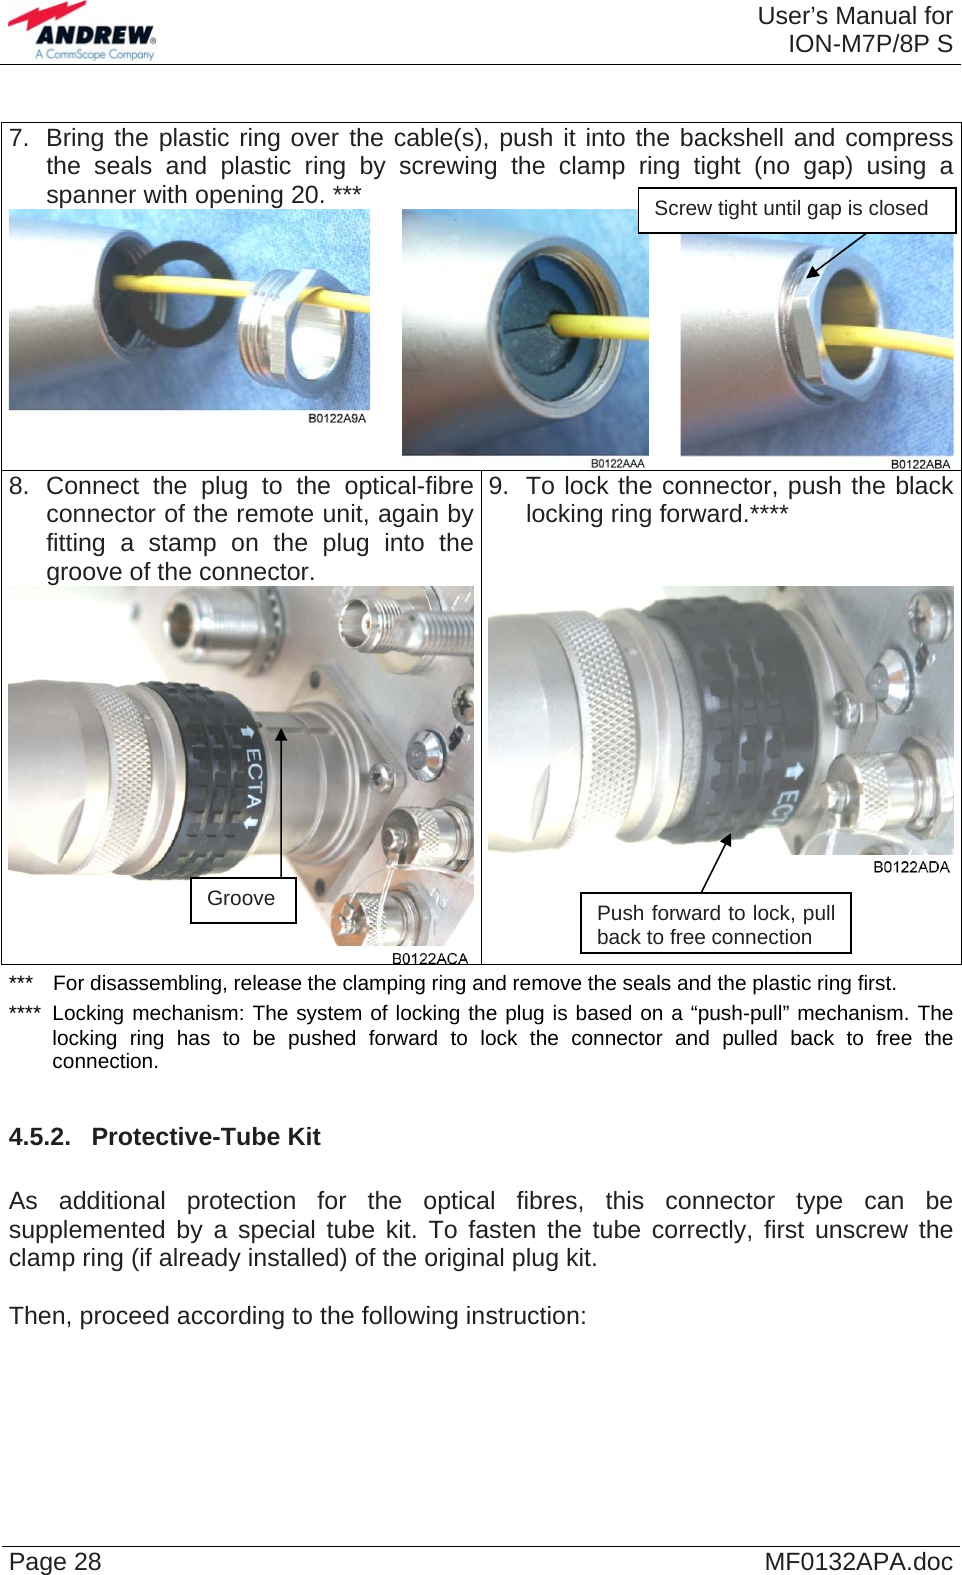  User’s Manual forION-M7P/8P S Page 28  MF0132APA.doc 7.  Bring the plastic ring over the cable(s), push it into the backshell and compress the seals and plastic ring by screwing the clamp ring tight (no gap) using a spanner with opening 20. ***   8. Connect the plug to the optical-fibre connector of the remote unit, again by fitting a stamp on the plug into the groove of the connector.  9.  To lock the connector, push the black locking ring forward.****  Screw tight until gap is closed  ***  For disassembling, release the clamping ring and remove the seals and the plastic ring first. ****  Locking mechanism: The system of locking the plug is based on a “push-pull” mechanism. The locking ring has to be pushed forward to lock the connector and pulled back to free the connection.  4.5.2.  Protective-Tube Kit  As additional protection for the optical fibres, this connector type can be supplemented by a special tube kit. To fasten the tube correctly, first unscrew the clamp ring (if already installed) of the original plug kit.   Then, proceed according to the following instruction:  Groove  Push forward to lock, pull back to free connection 